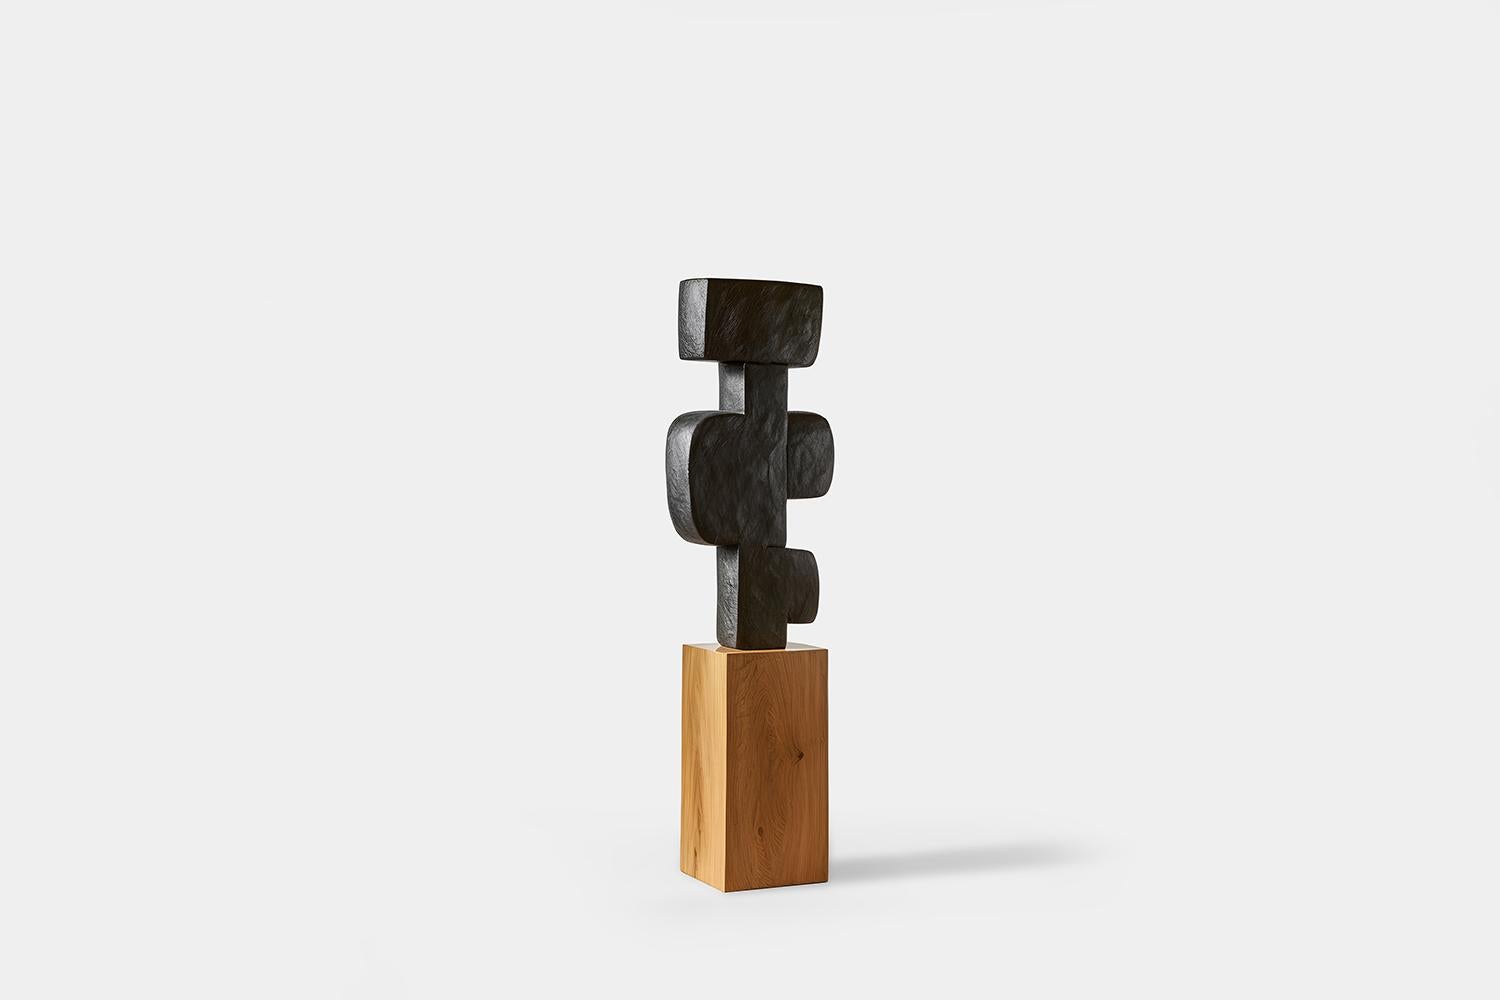 Abstract Modernist Free Form Wooden Sculpture in the style of Jean Arp, Unseen Force 14 by Joel Escalona



This monolithic sculpture, designed by the talented Artist Joel Escalona, is a towering example of beauty in craftsmanship. Hand and digital